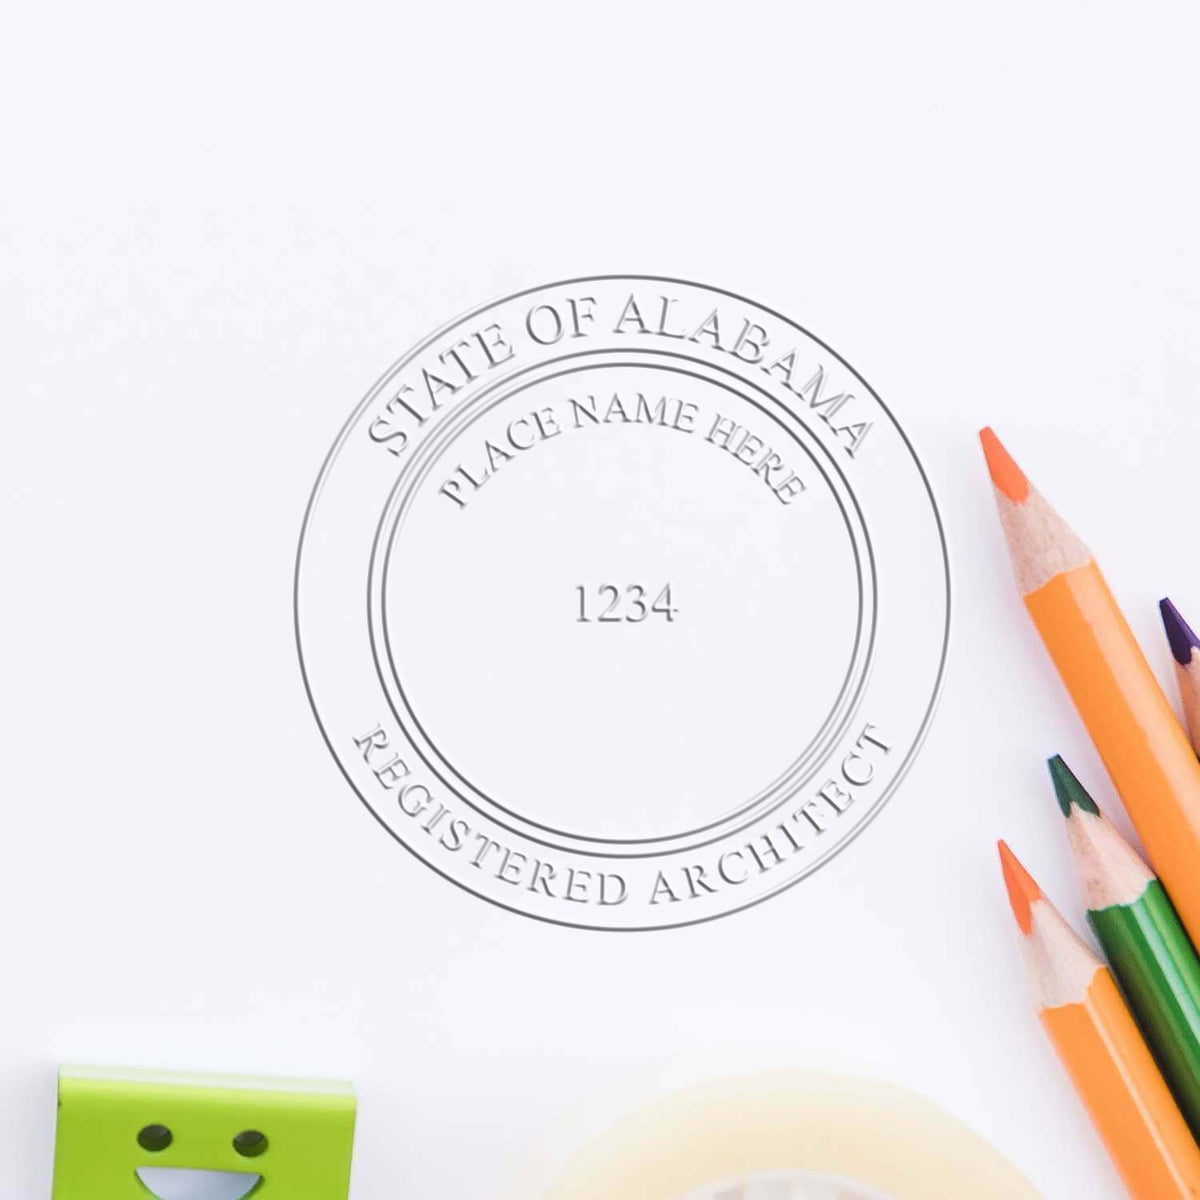 A stamped impression of the State of Alabama Architectural Seal Embosser in this stylish lifestyle photo, setting the tone for a unique and personalized product.